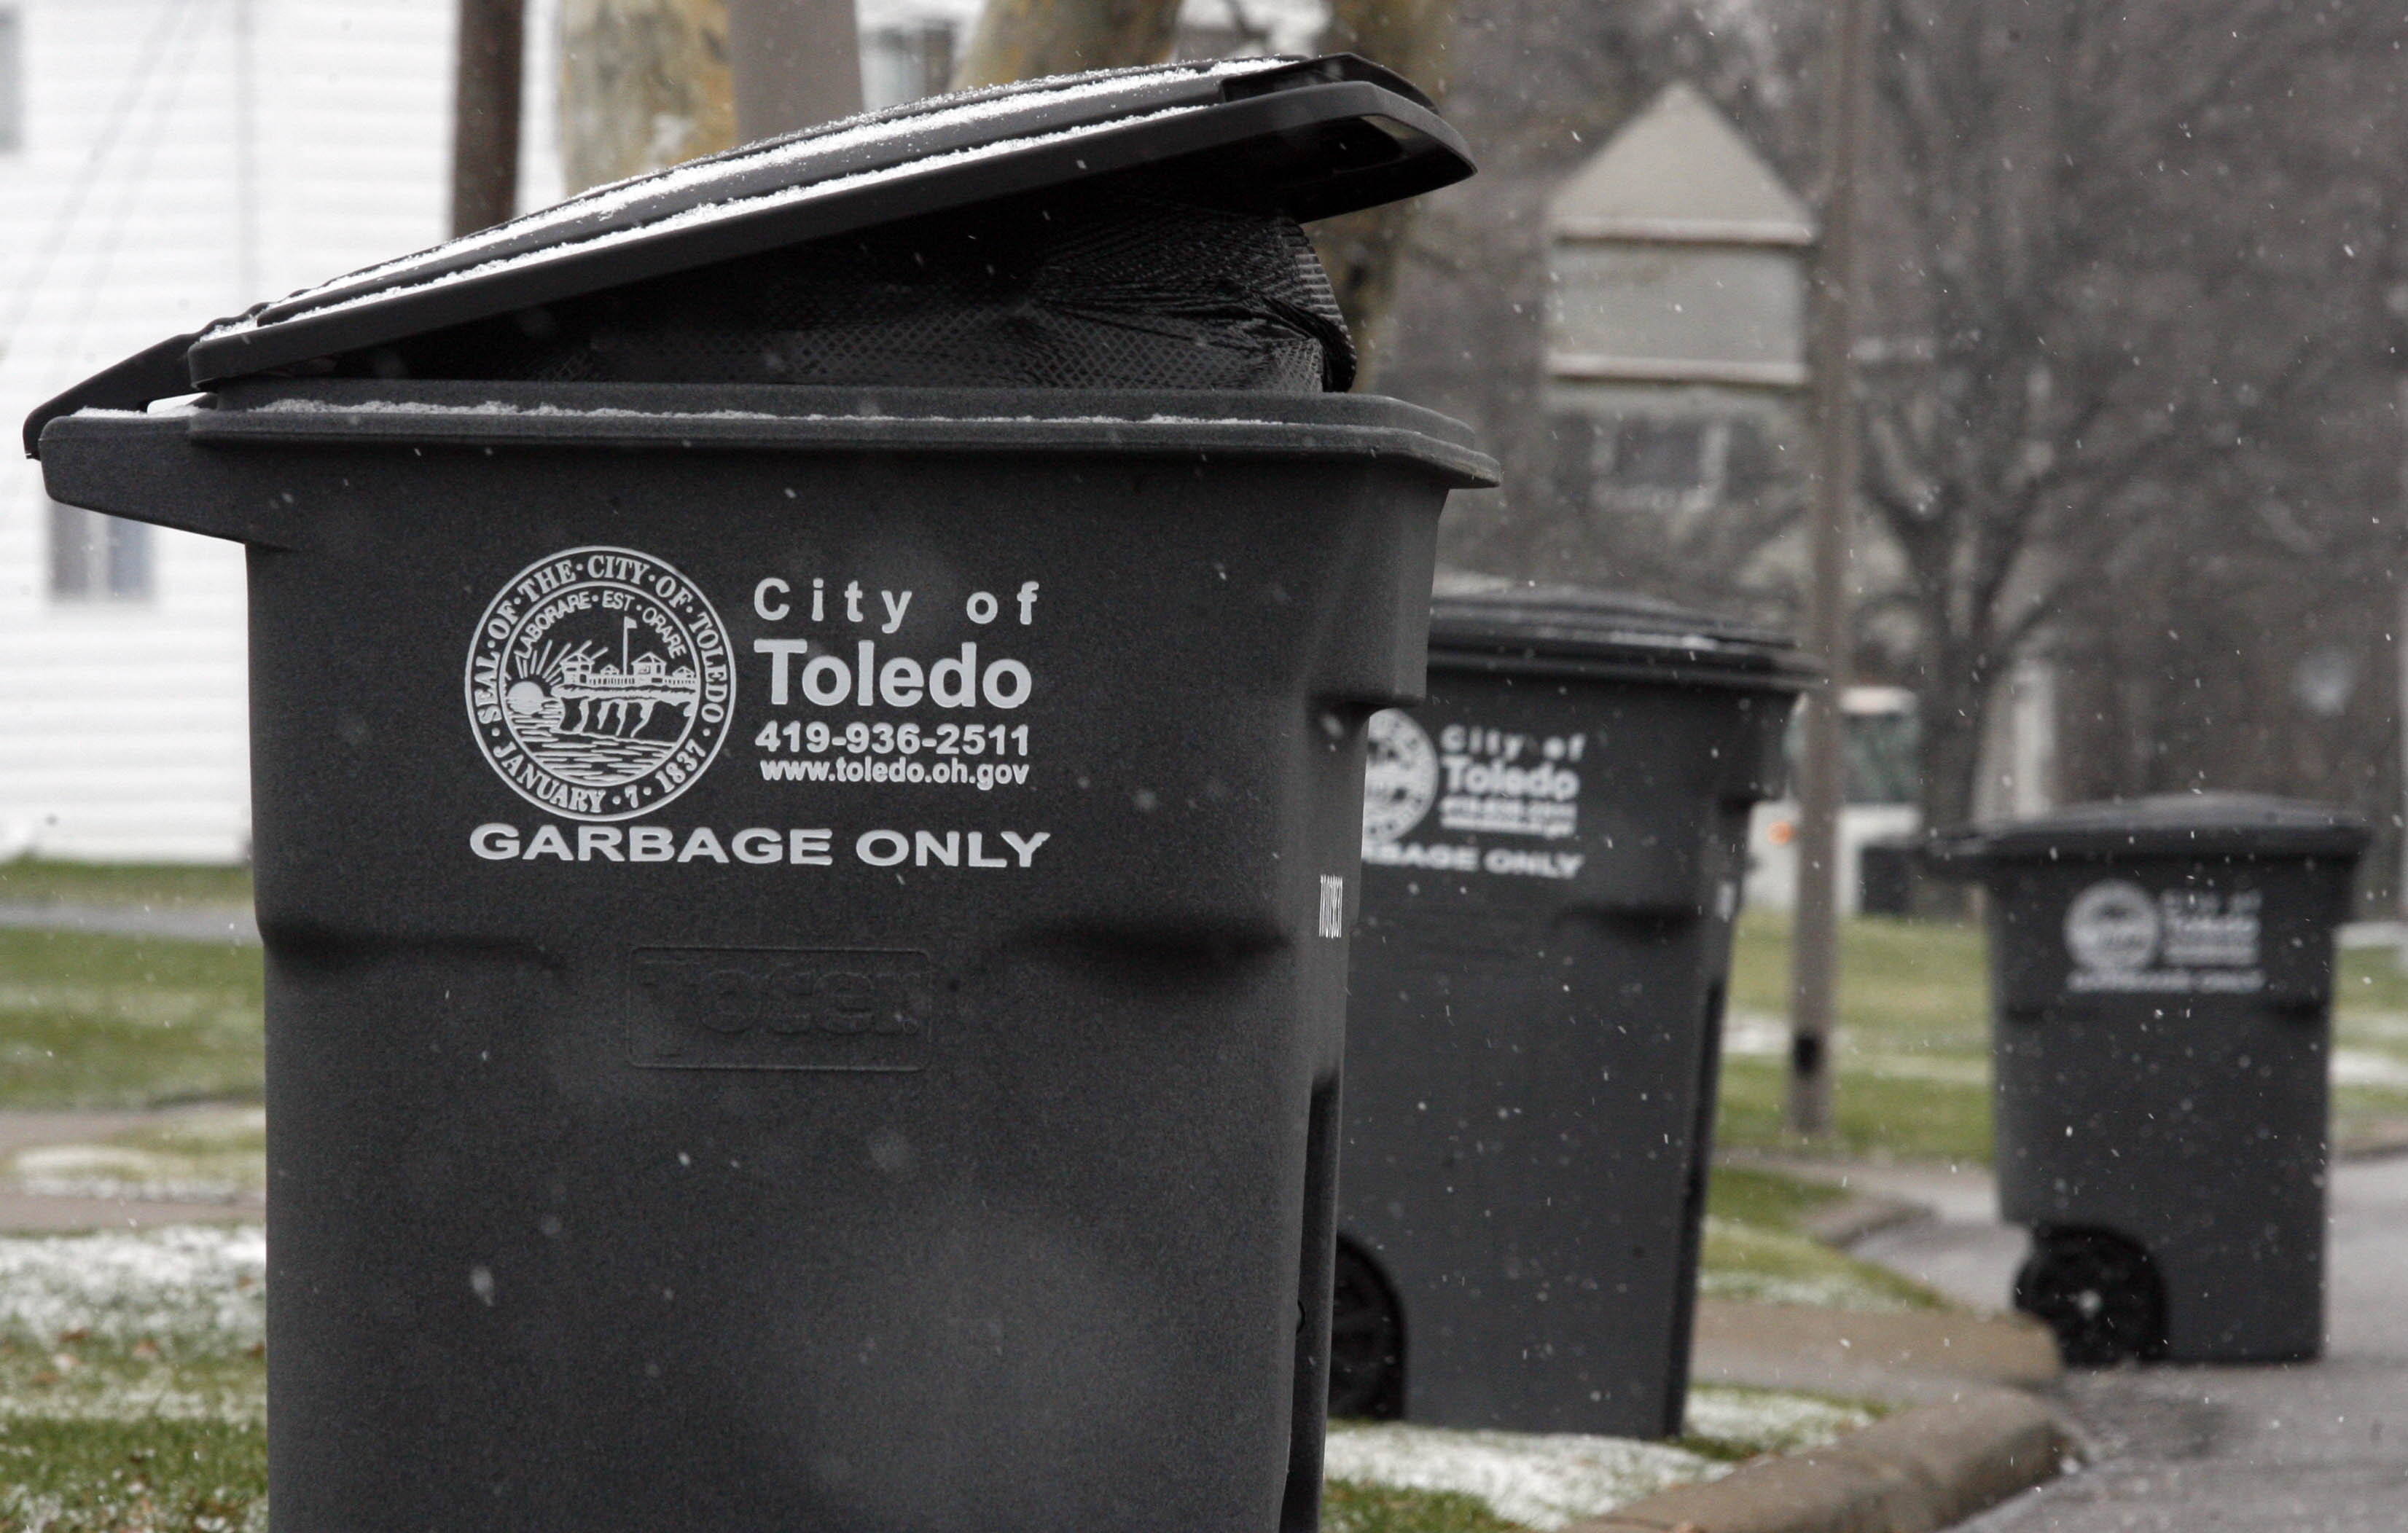 City, county trash debate puts disabled in middle - The Blade3304 x 2104